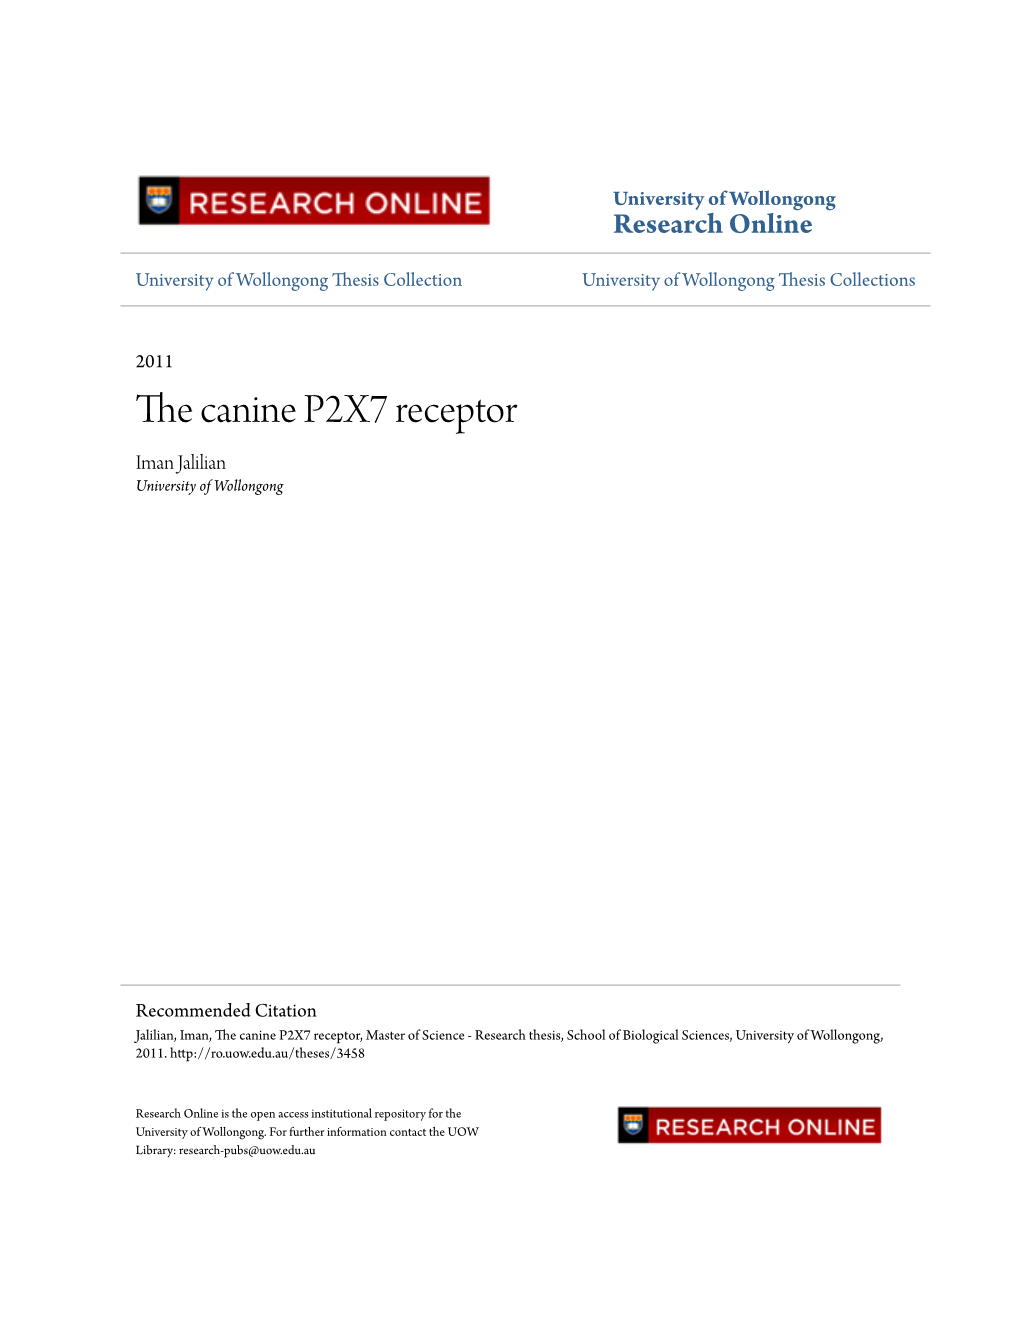 The Canine P2X7 Receptor, Master of Science - Research Thesis, School of Biological Sciences, University of Wollongong, 2011